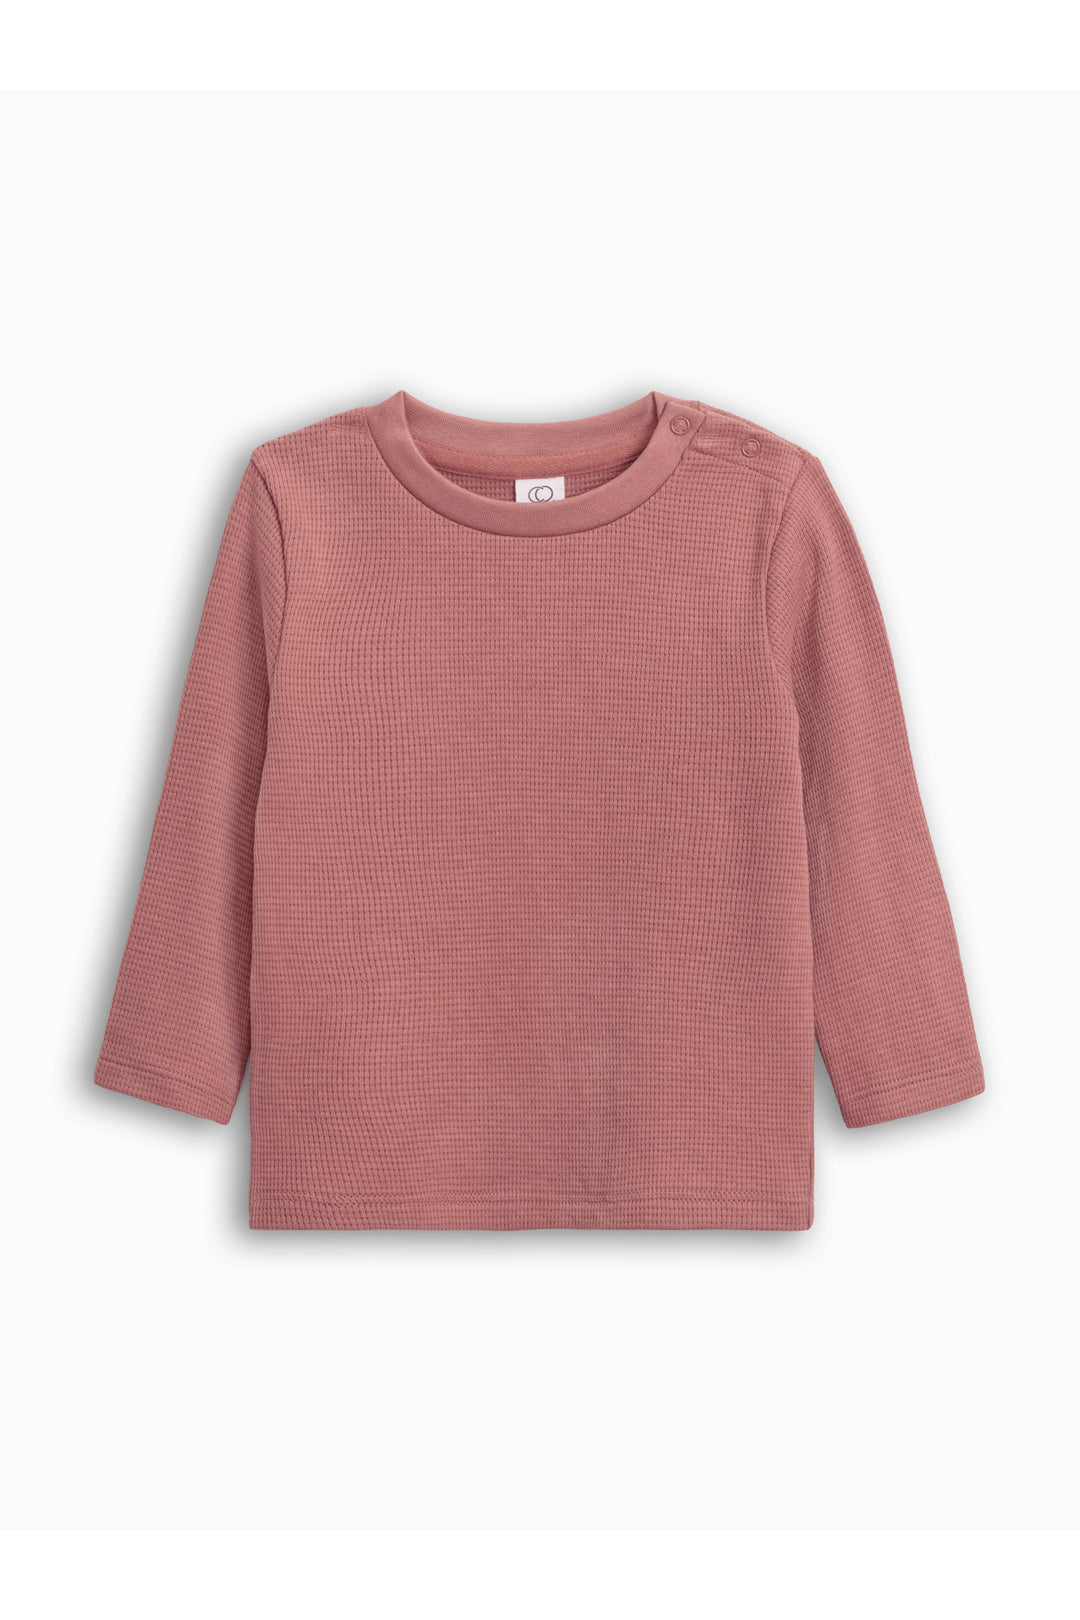 The Mesa Rouge Waffle Knit Shoulder Snap Top